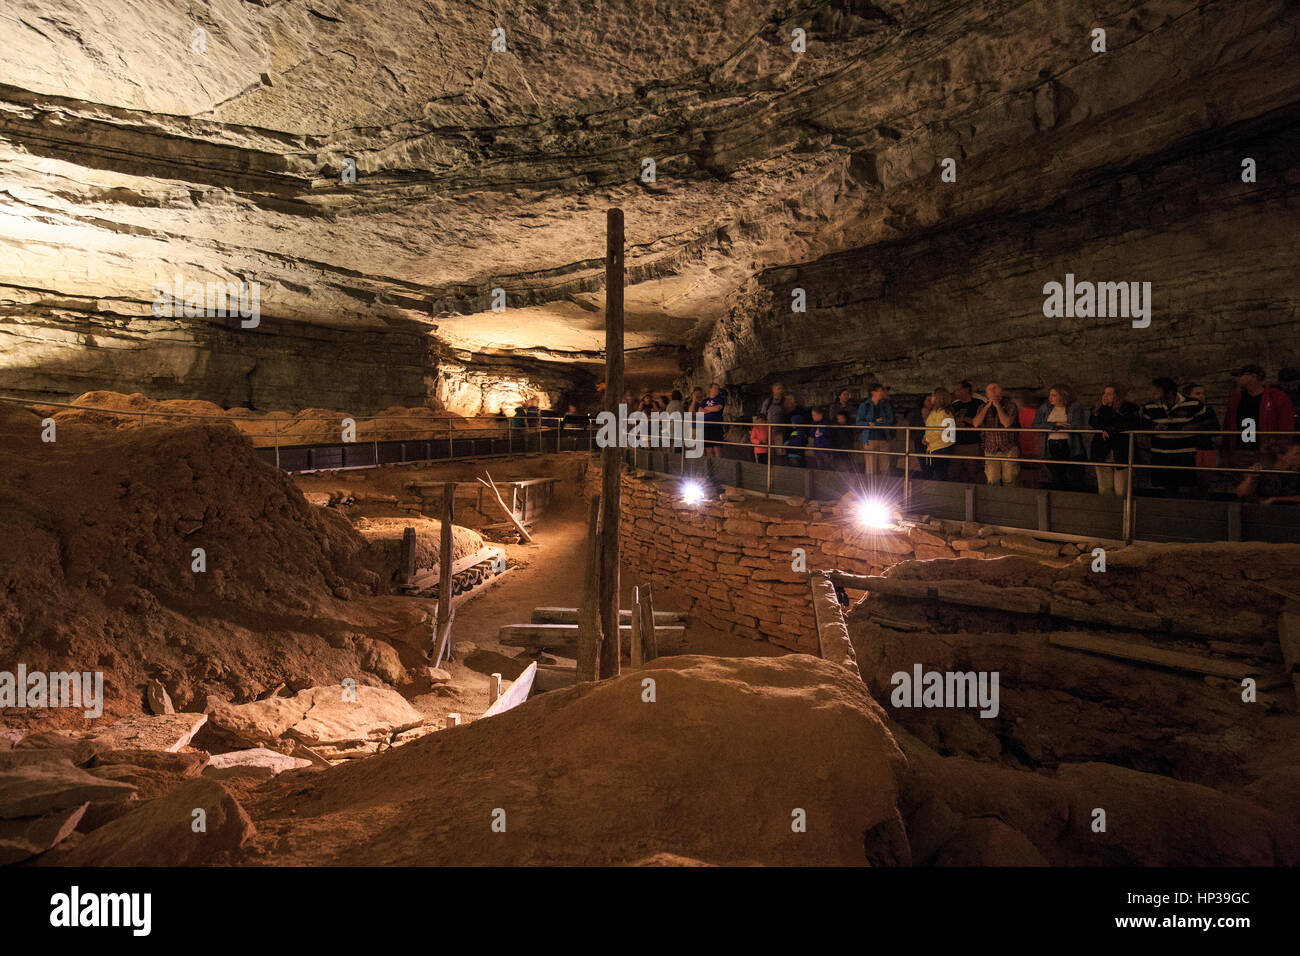 Saltpeter Mine In Mammoth Cave National Park Stock Photo Alamy